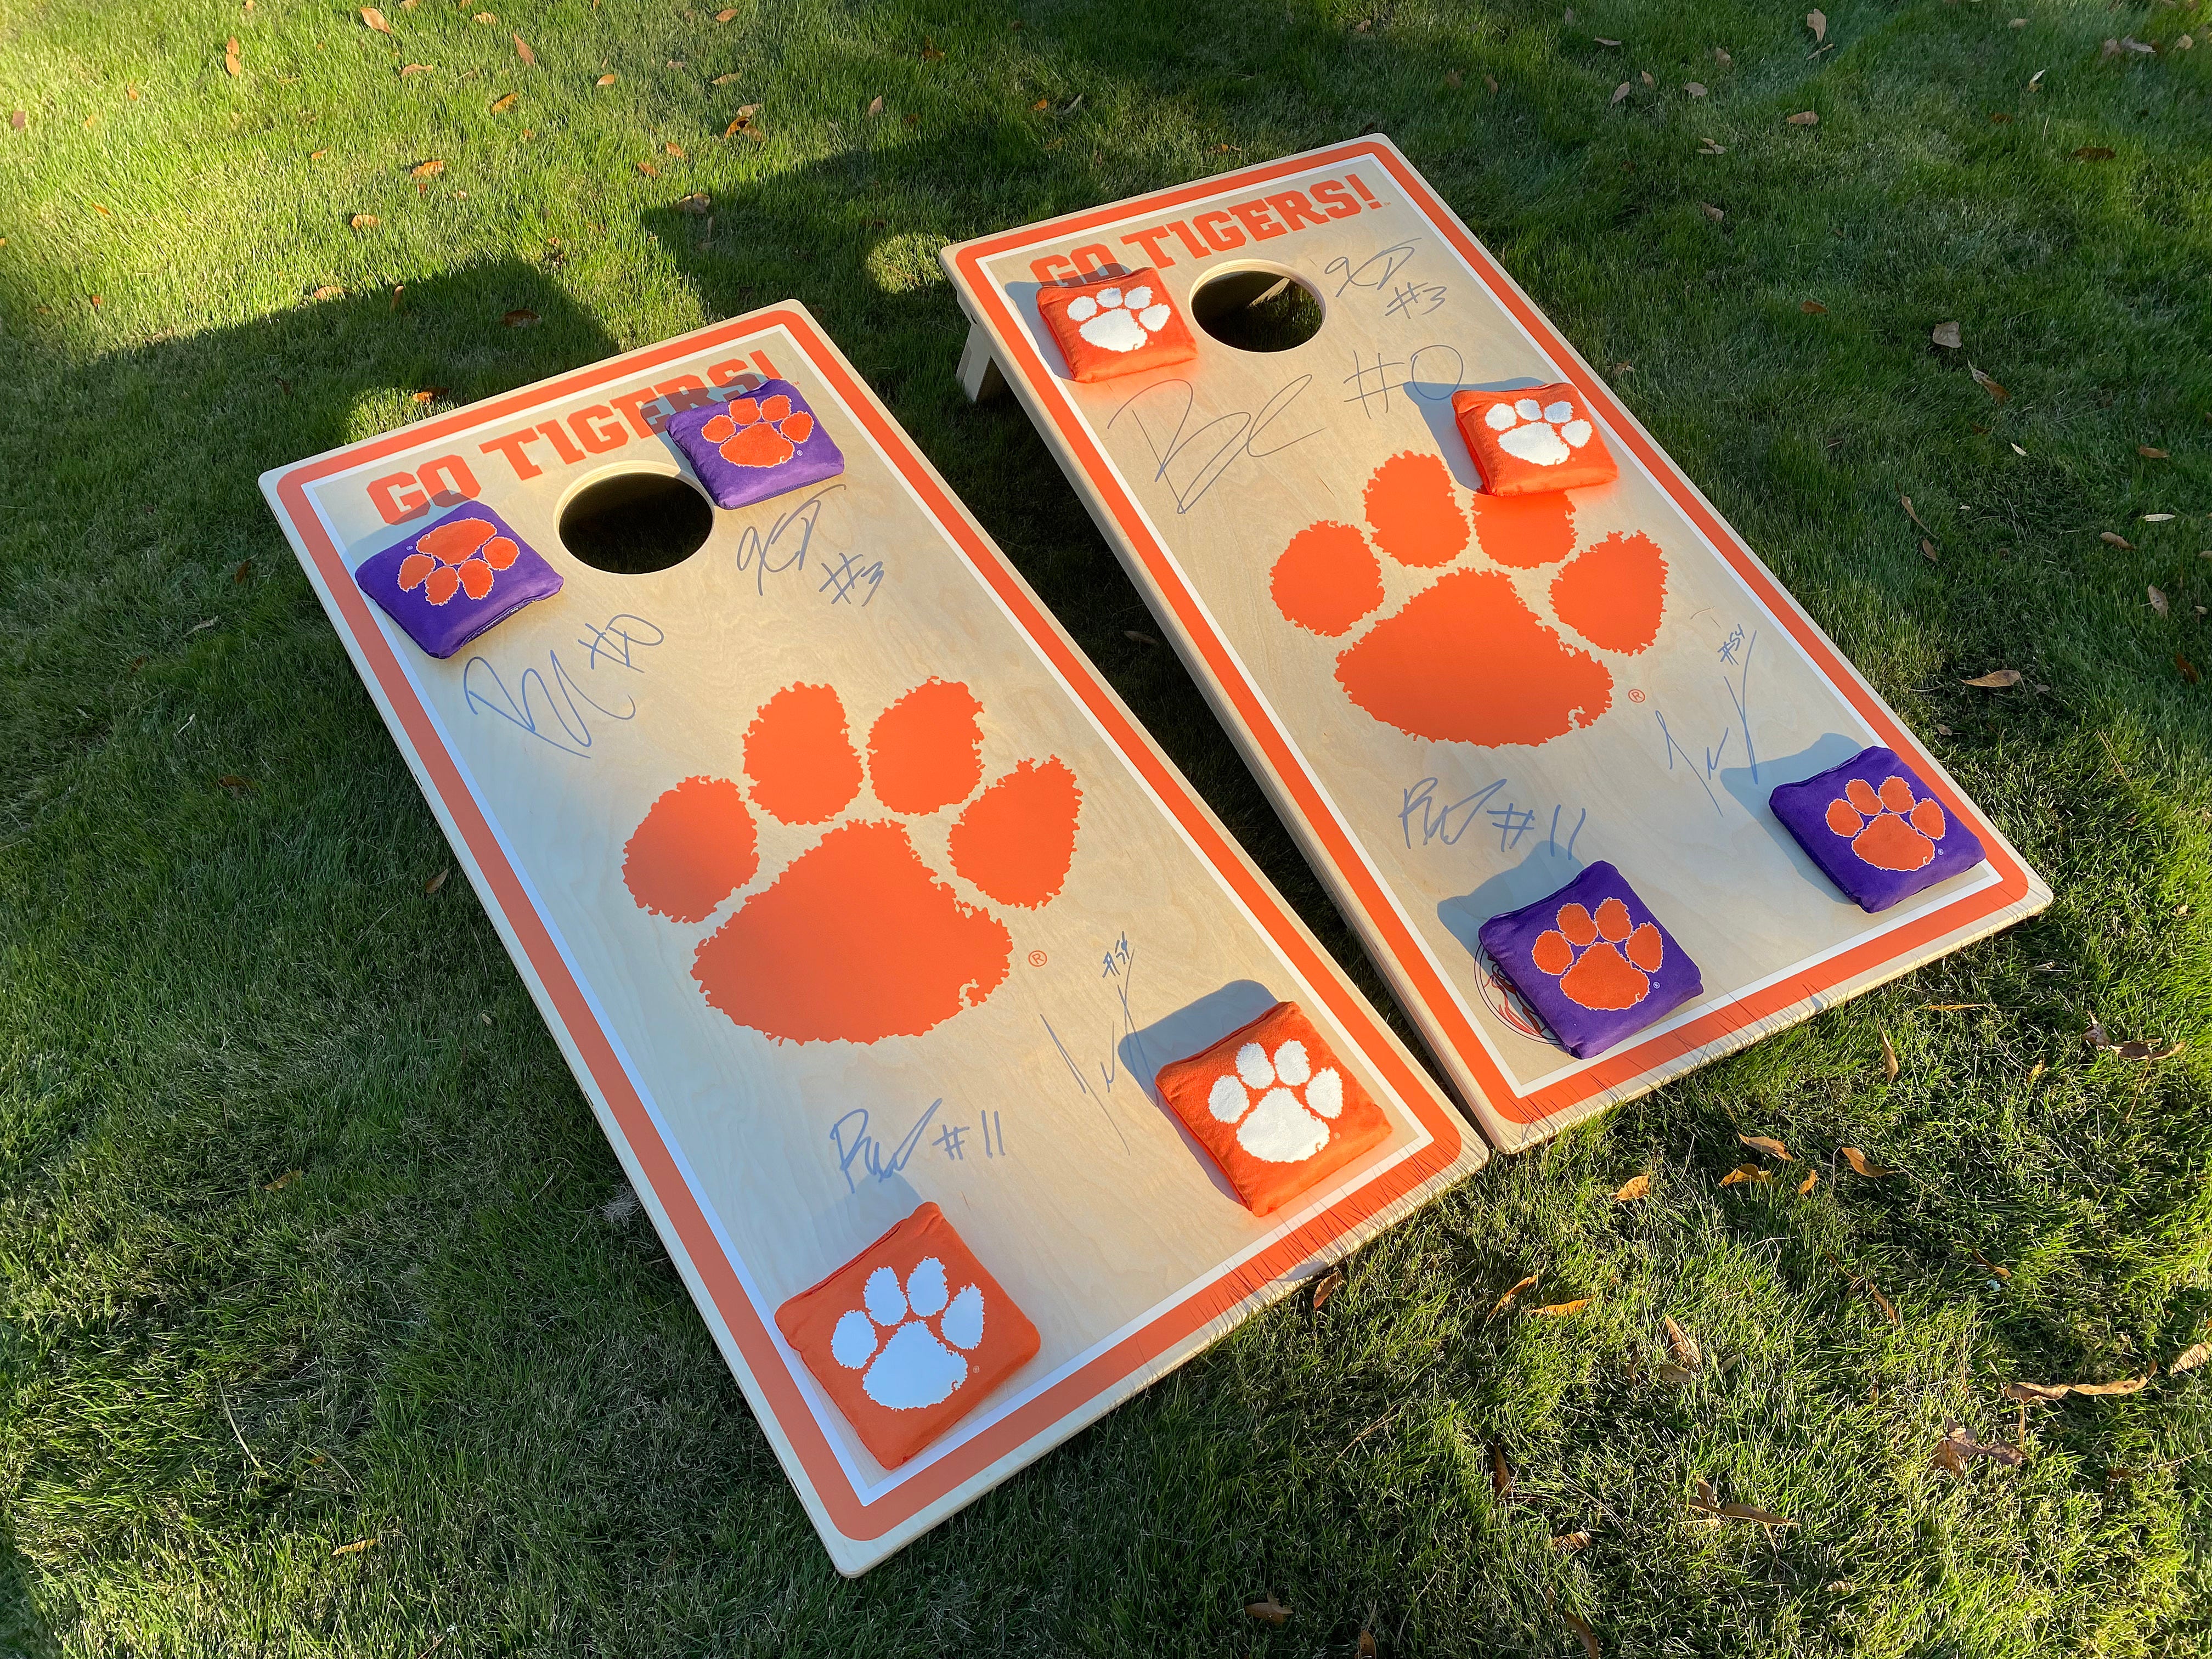 Black Friday:  Limited Edition Pro Cornhole Boards and Bags Signed by Trotter, Carter, Thomas and Woods